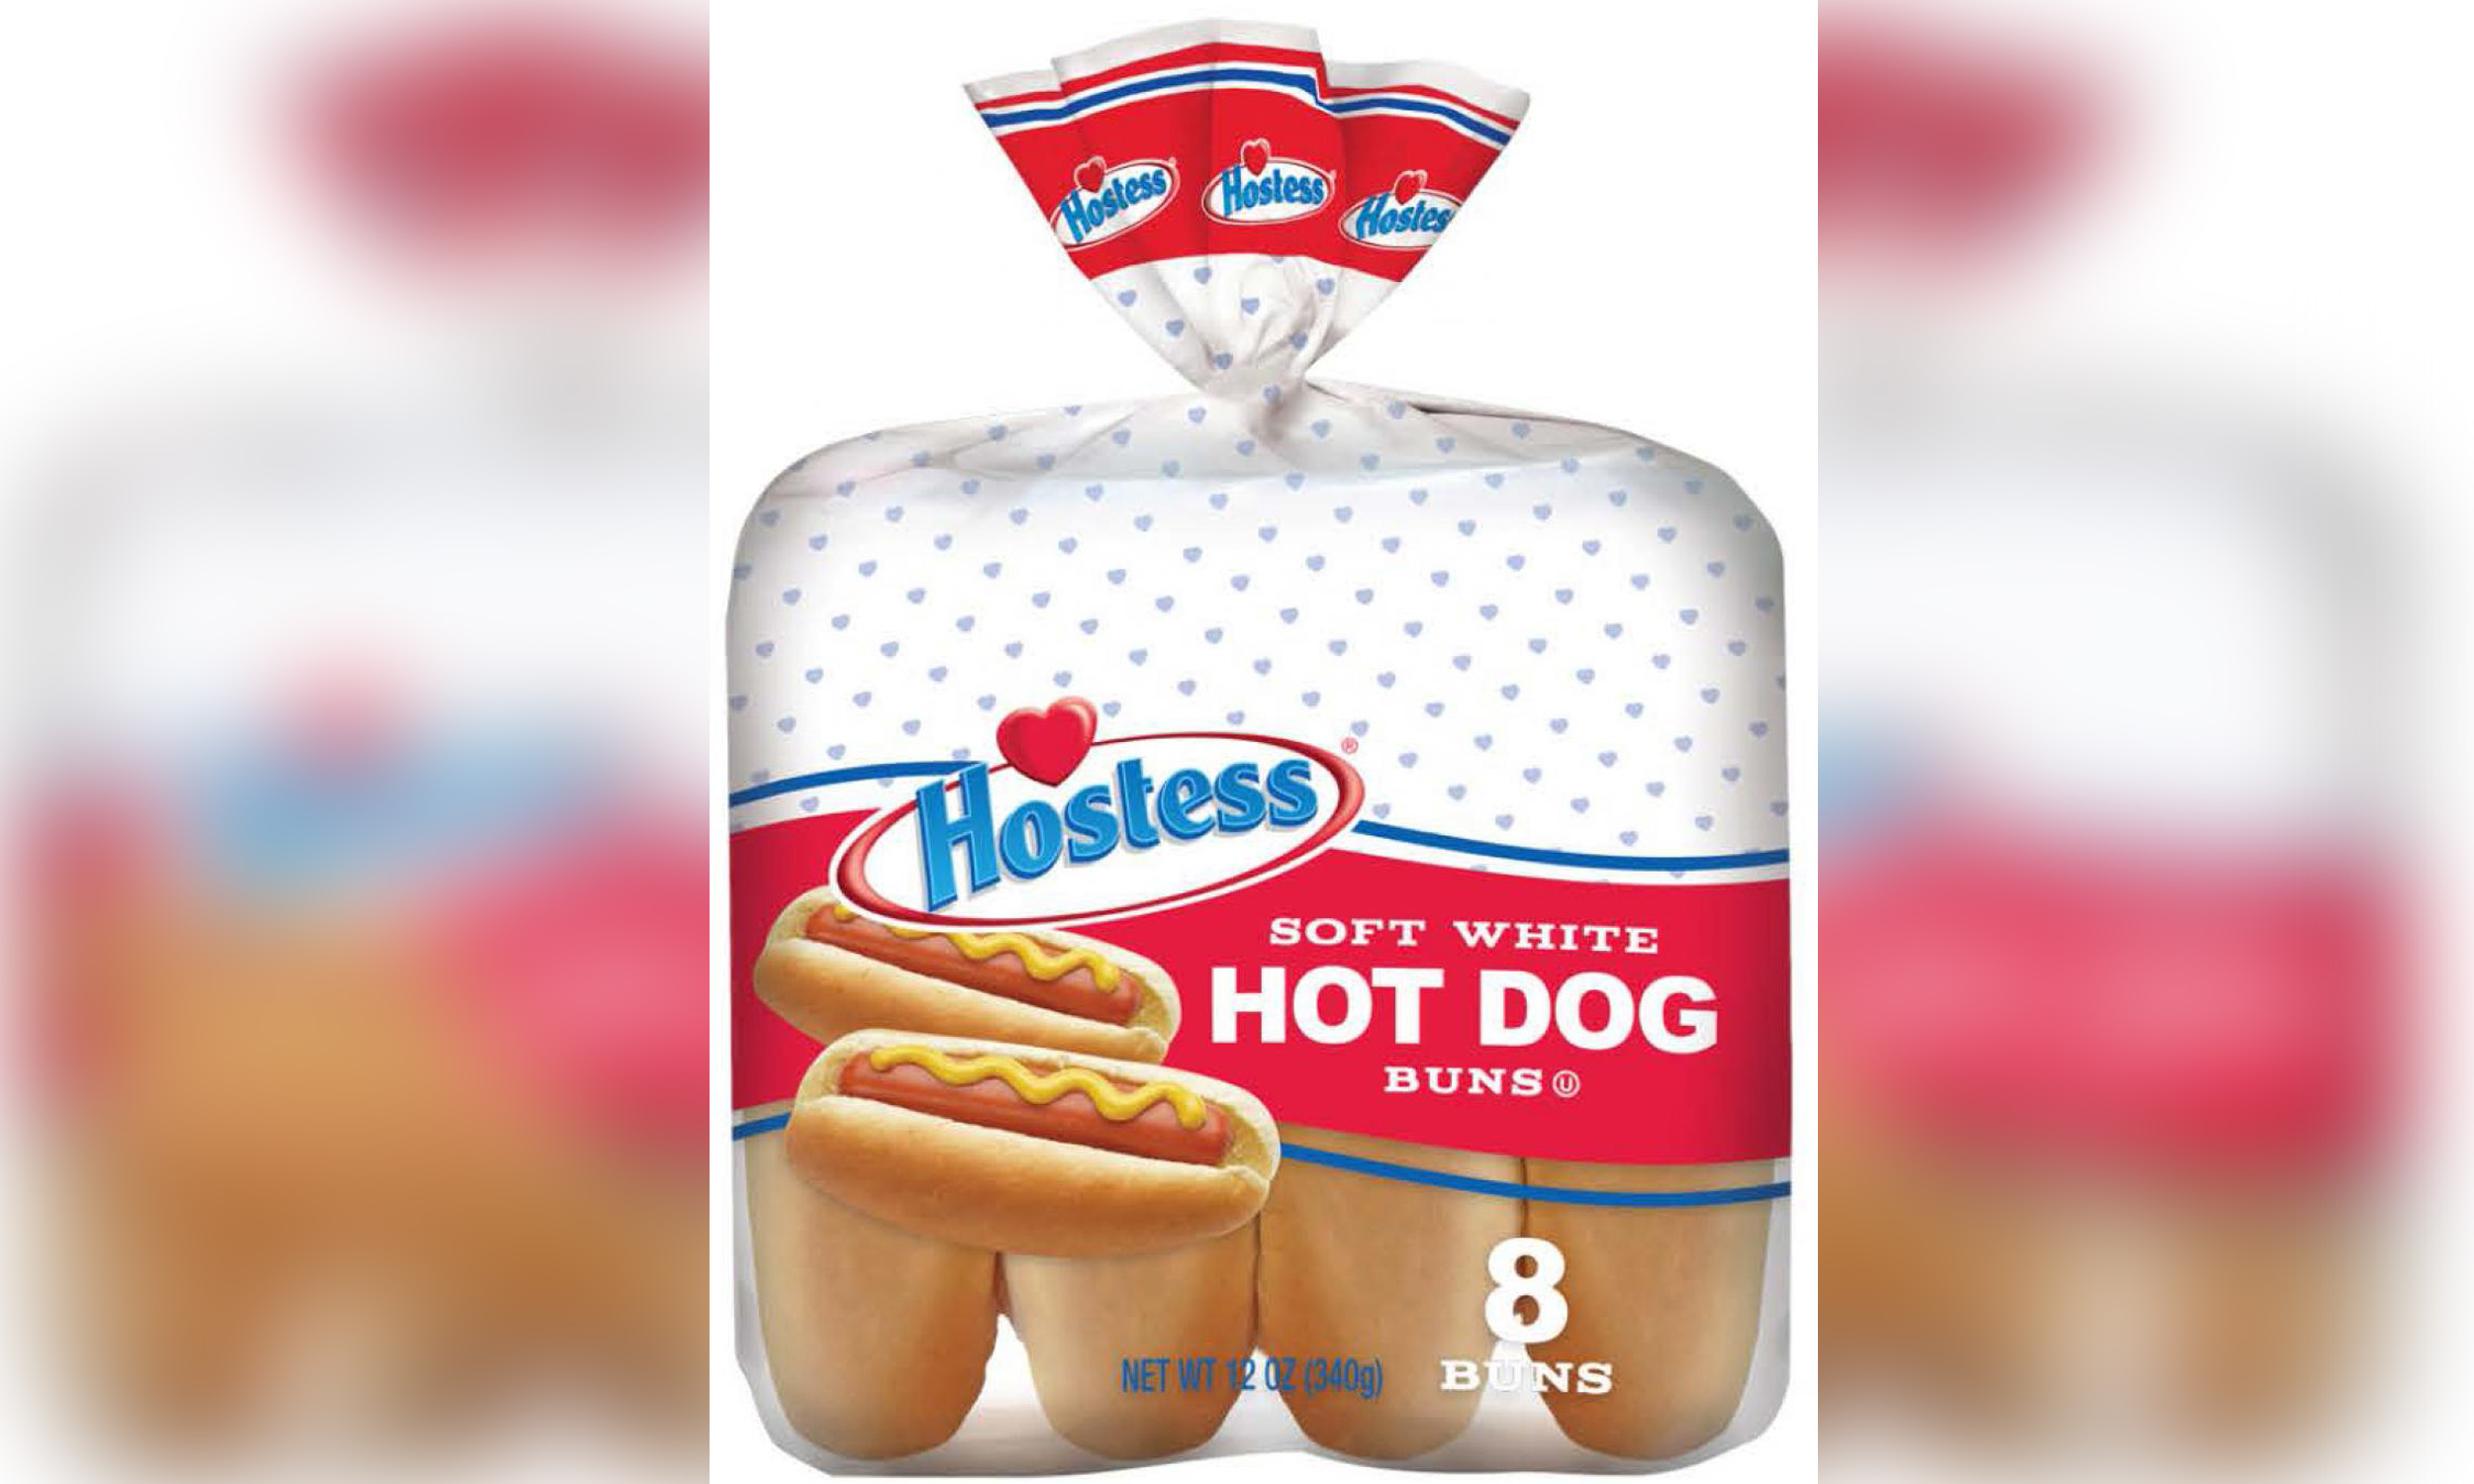 Hostess Buns Affected By Salmonella And Listeria Contamination Caution!